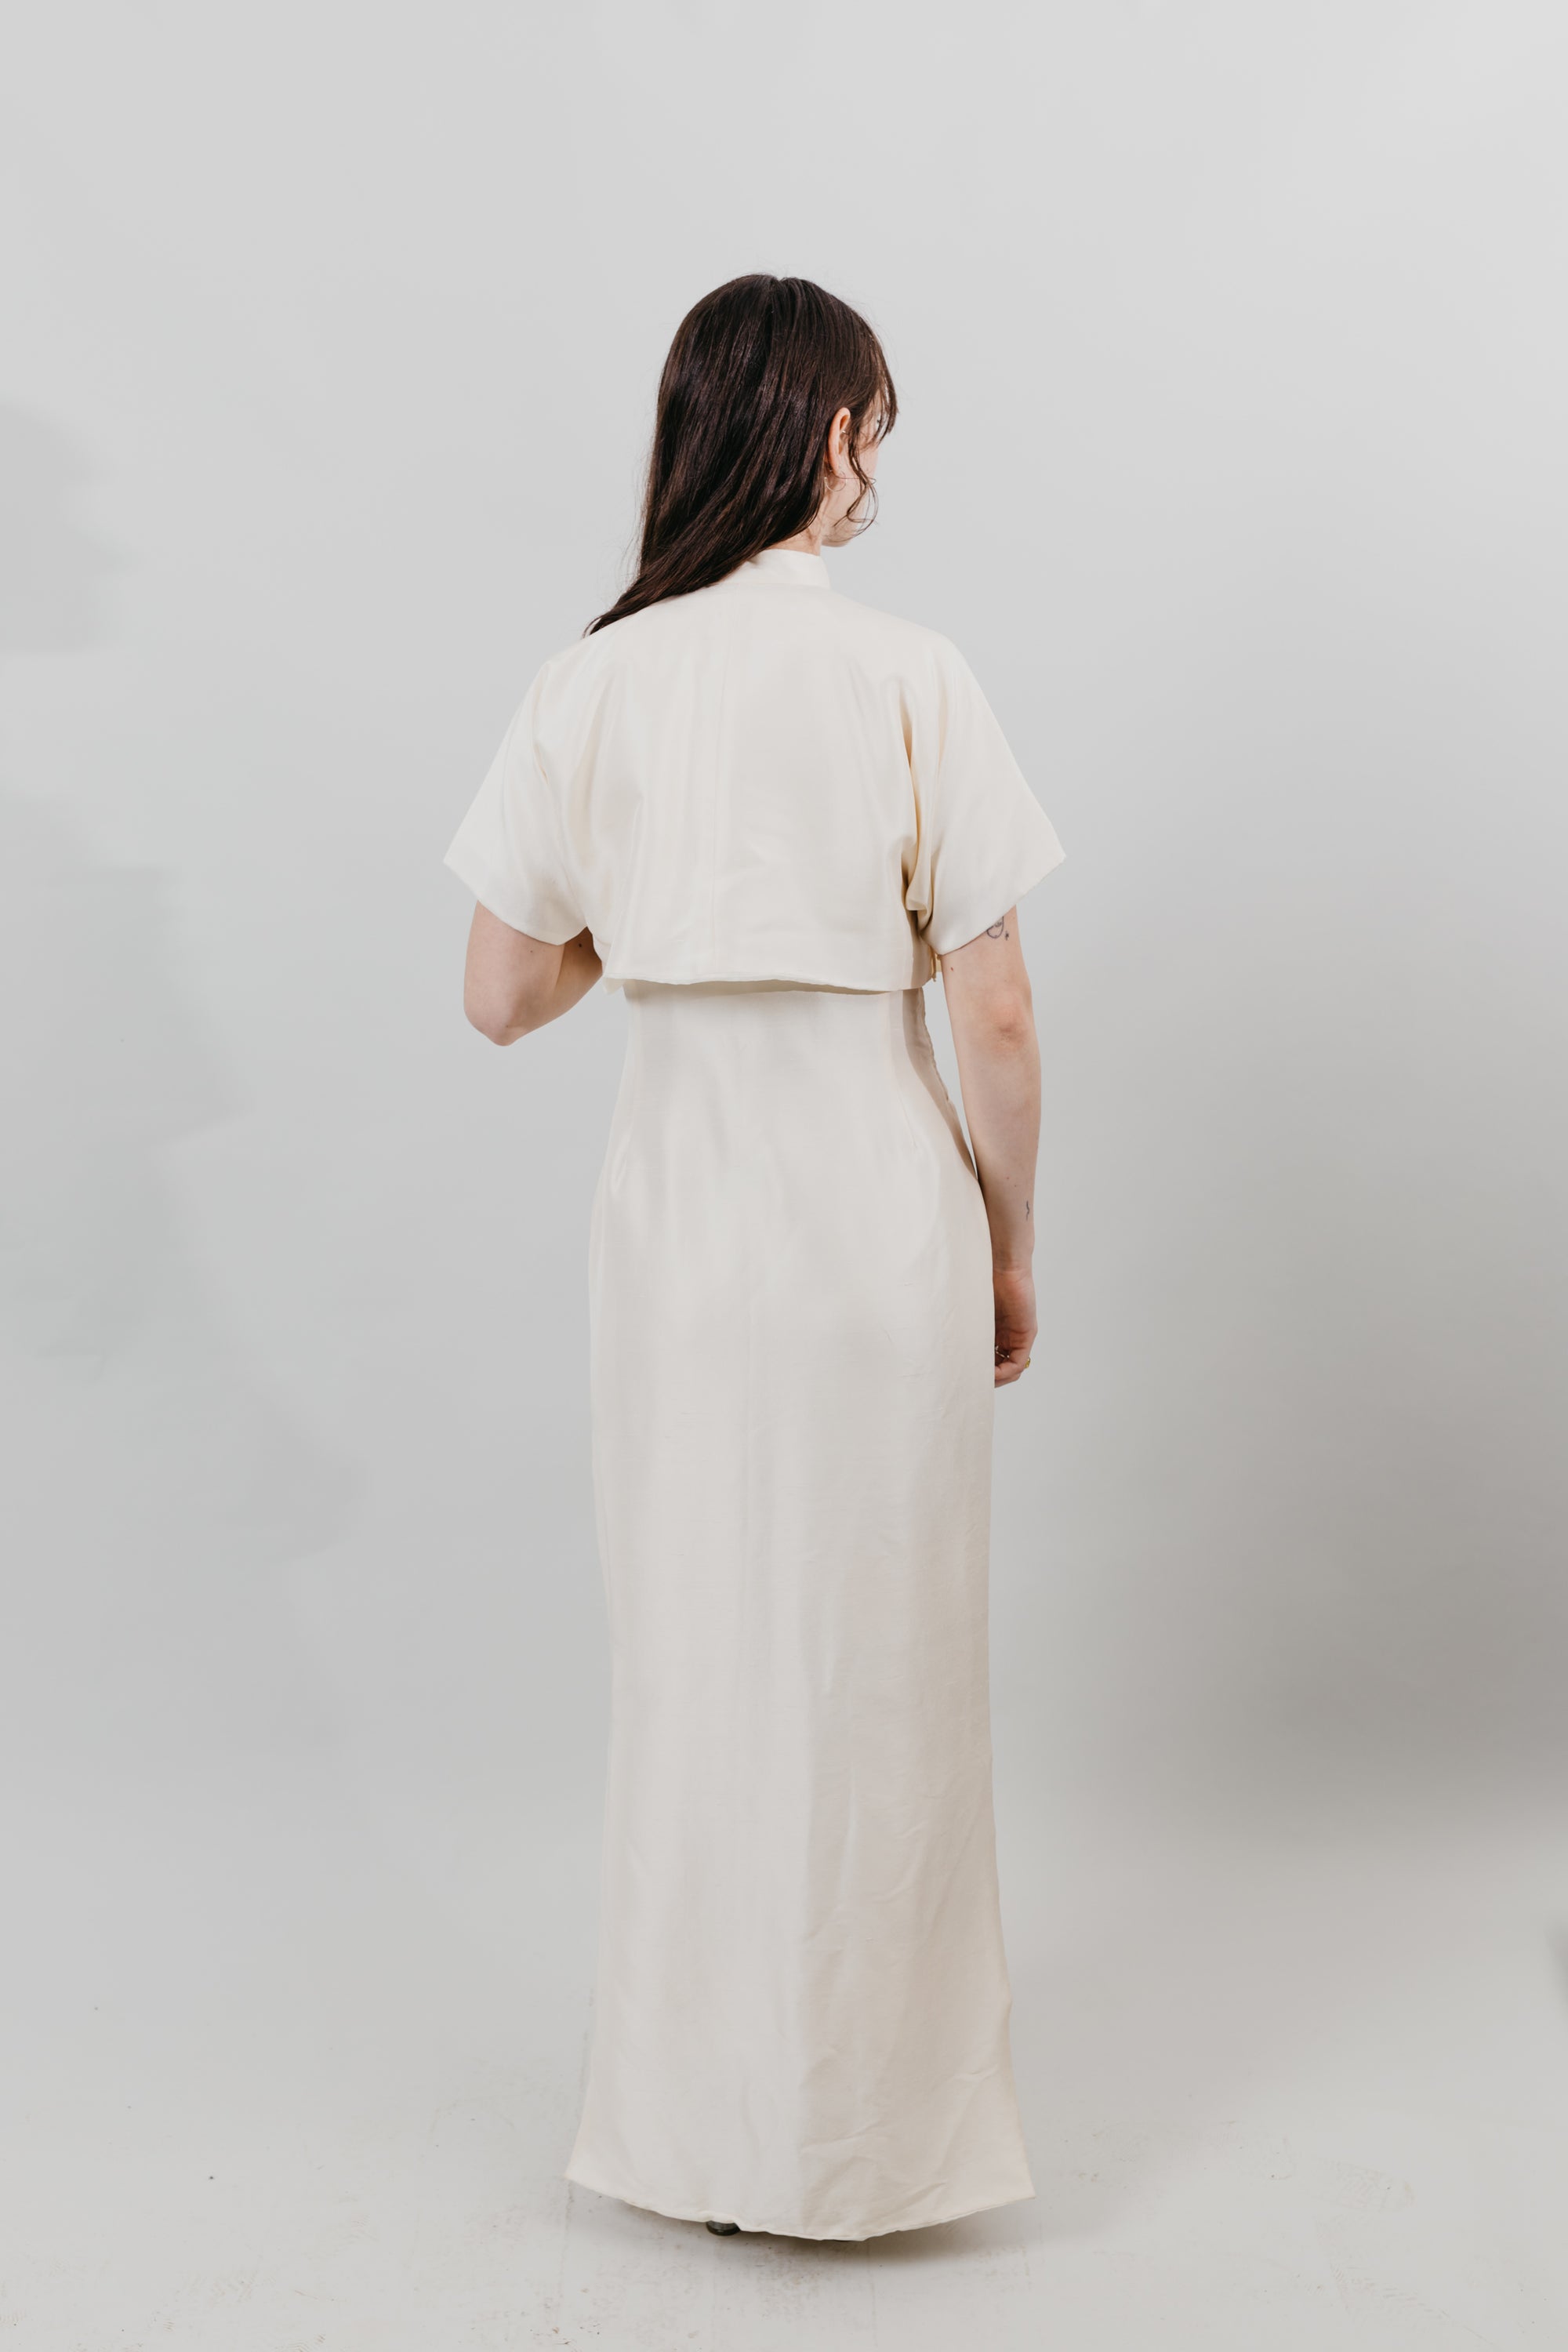 Woman wearing a white cheongsam - back view with white background.